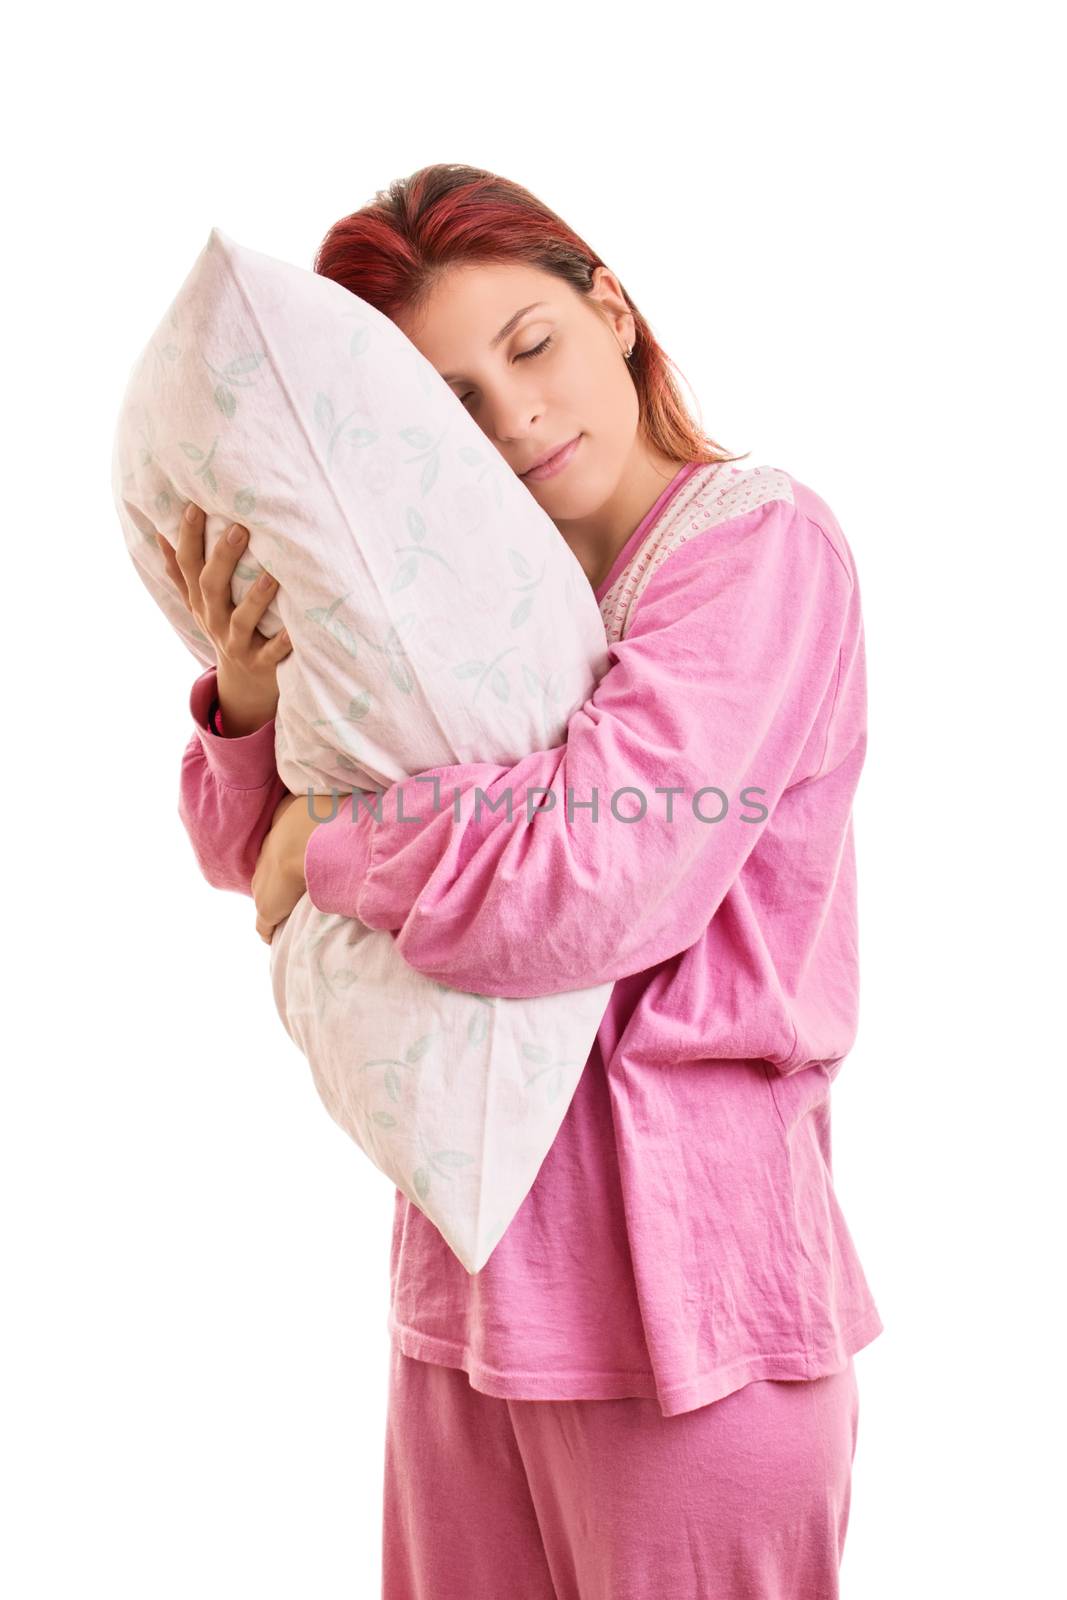 Young girl in pajamas holding a pillow by Mendelex